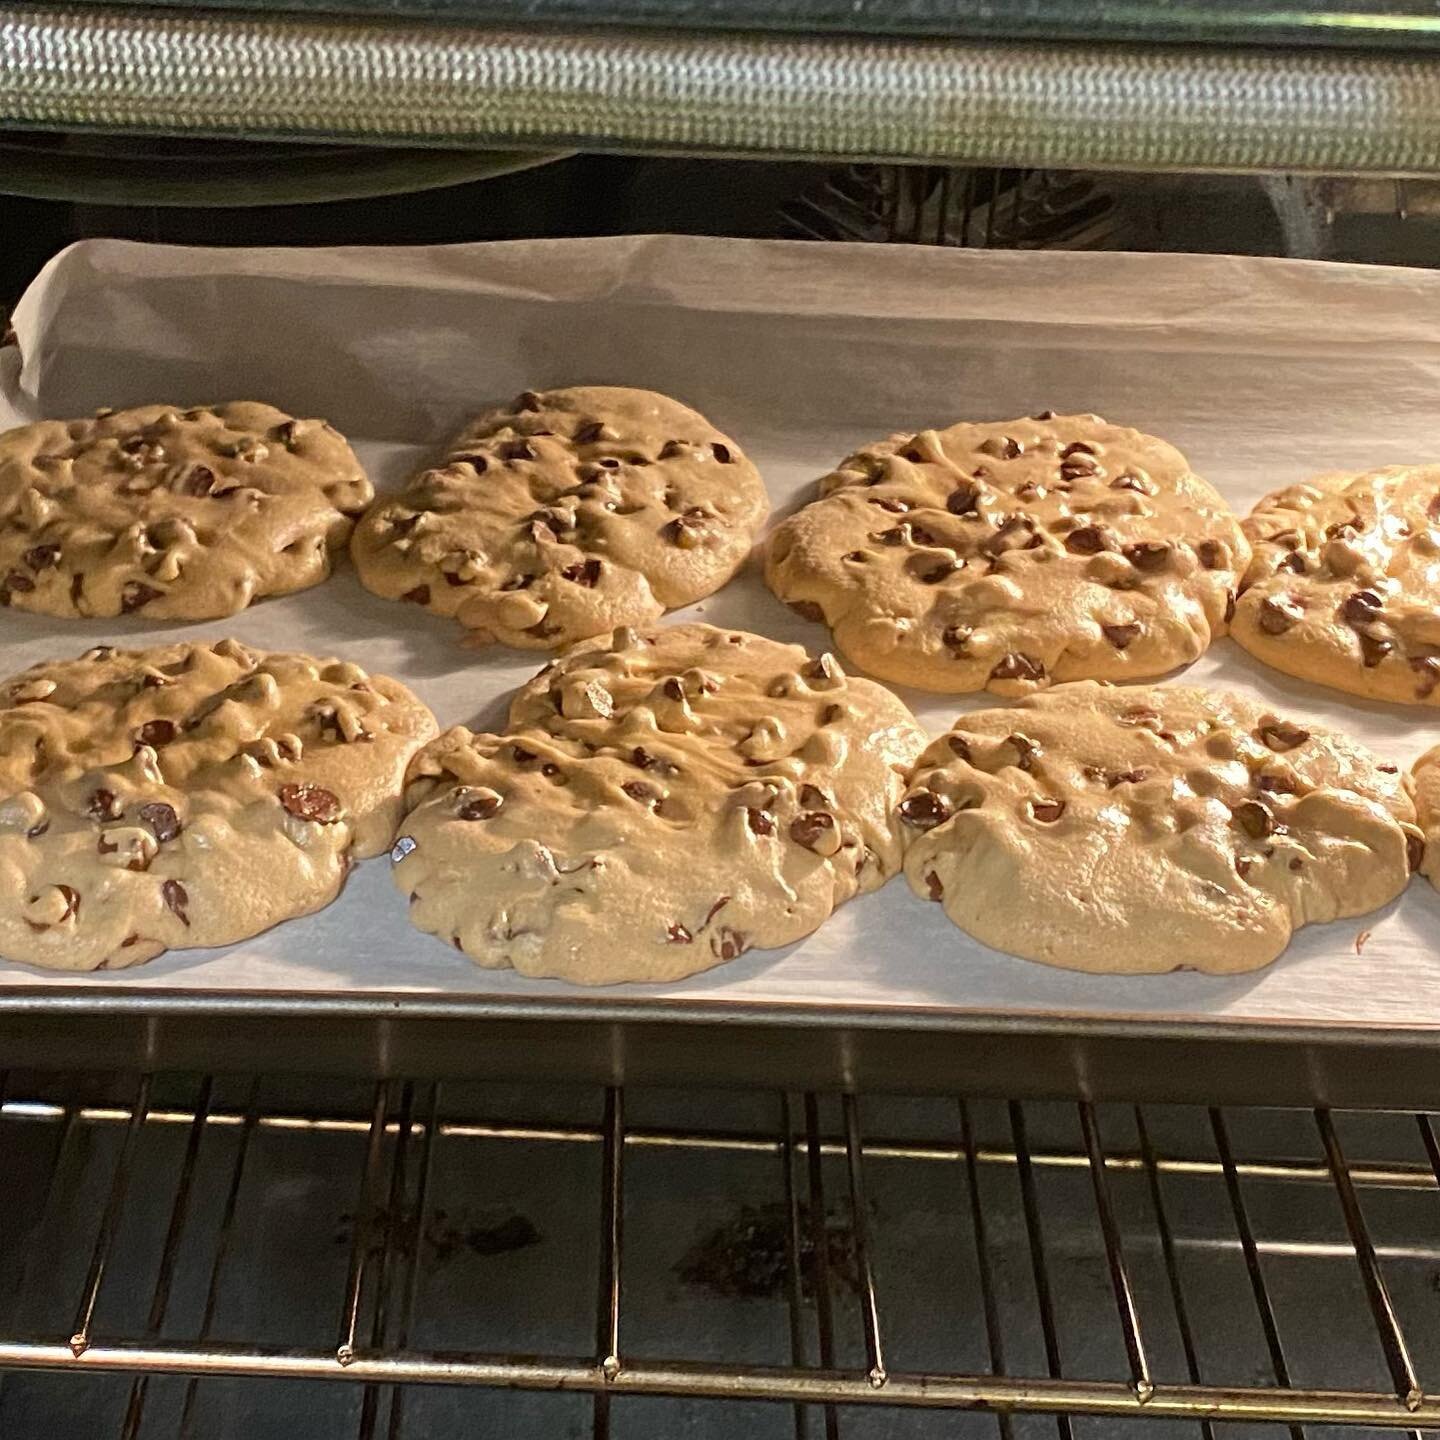 Making my first Camp Poggy Chocolate Chip Cookies. 4 cups of Semi sweet chips for 22 cookies